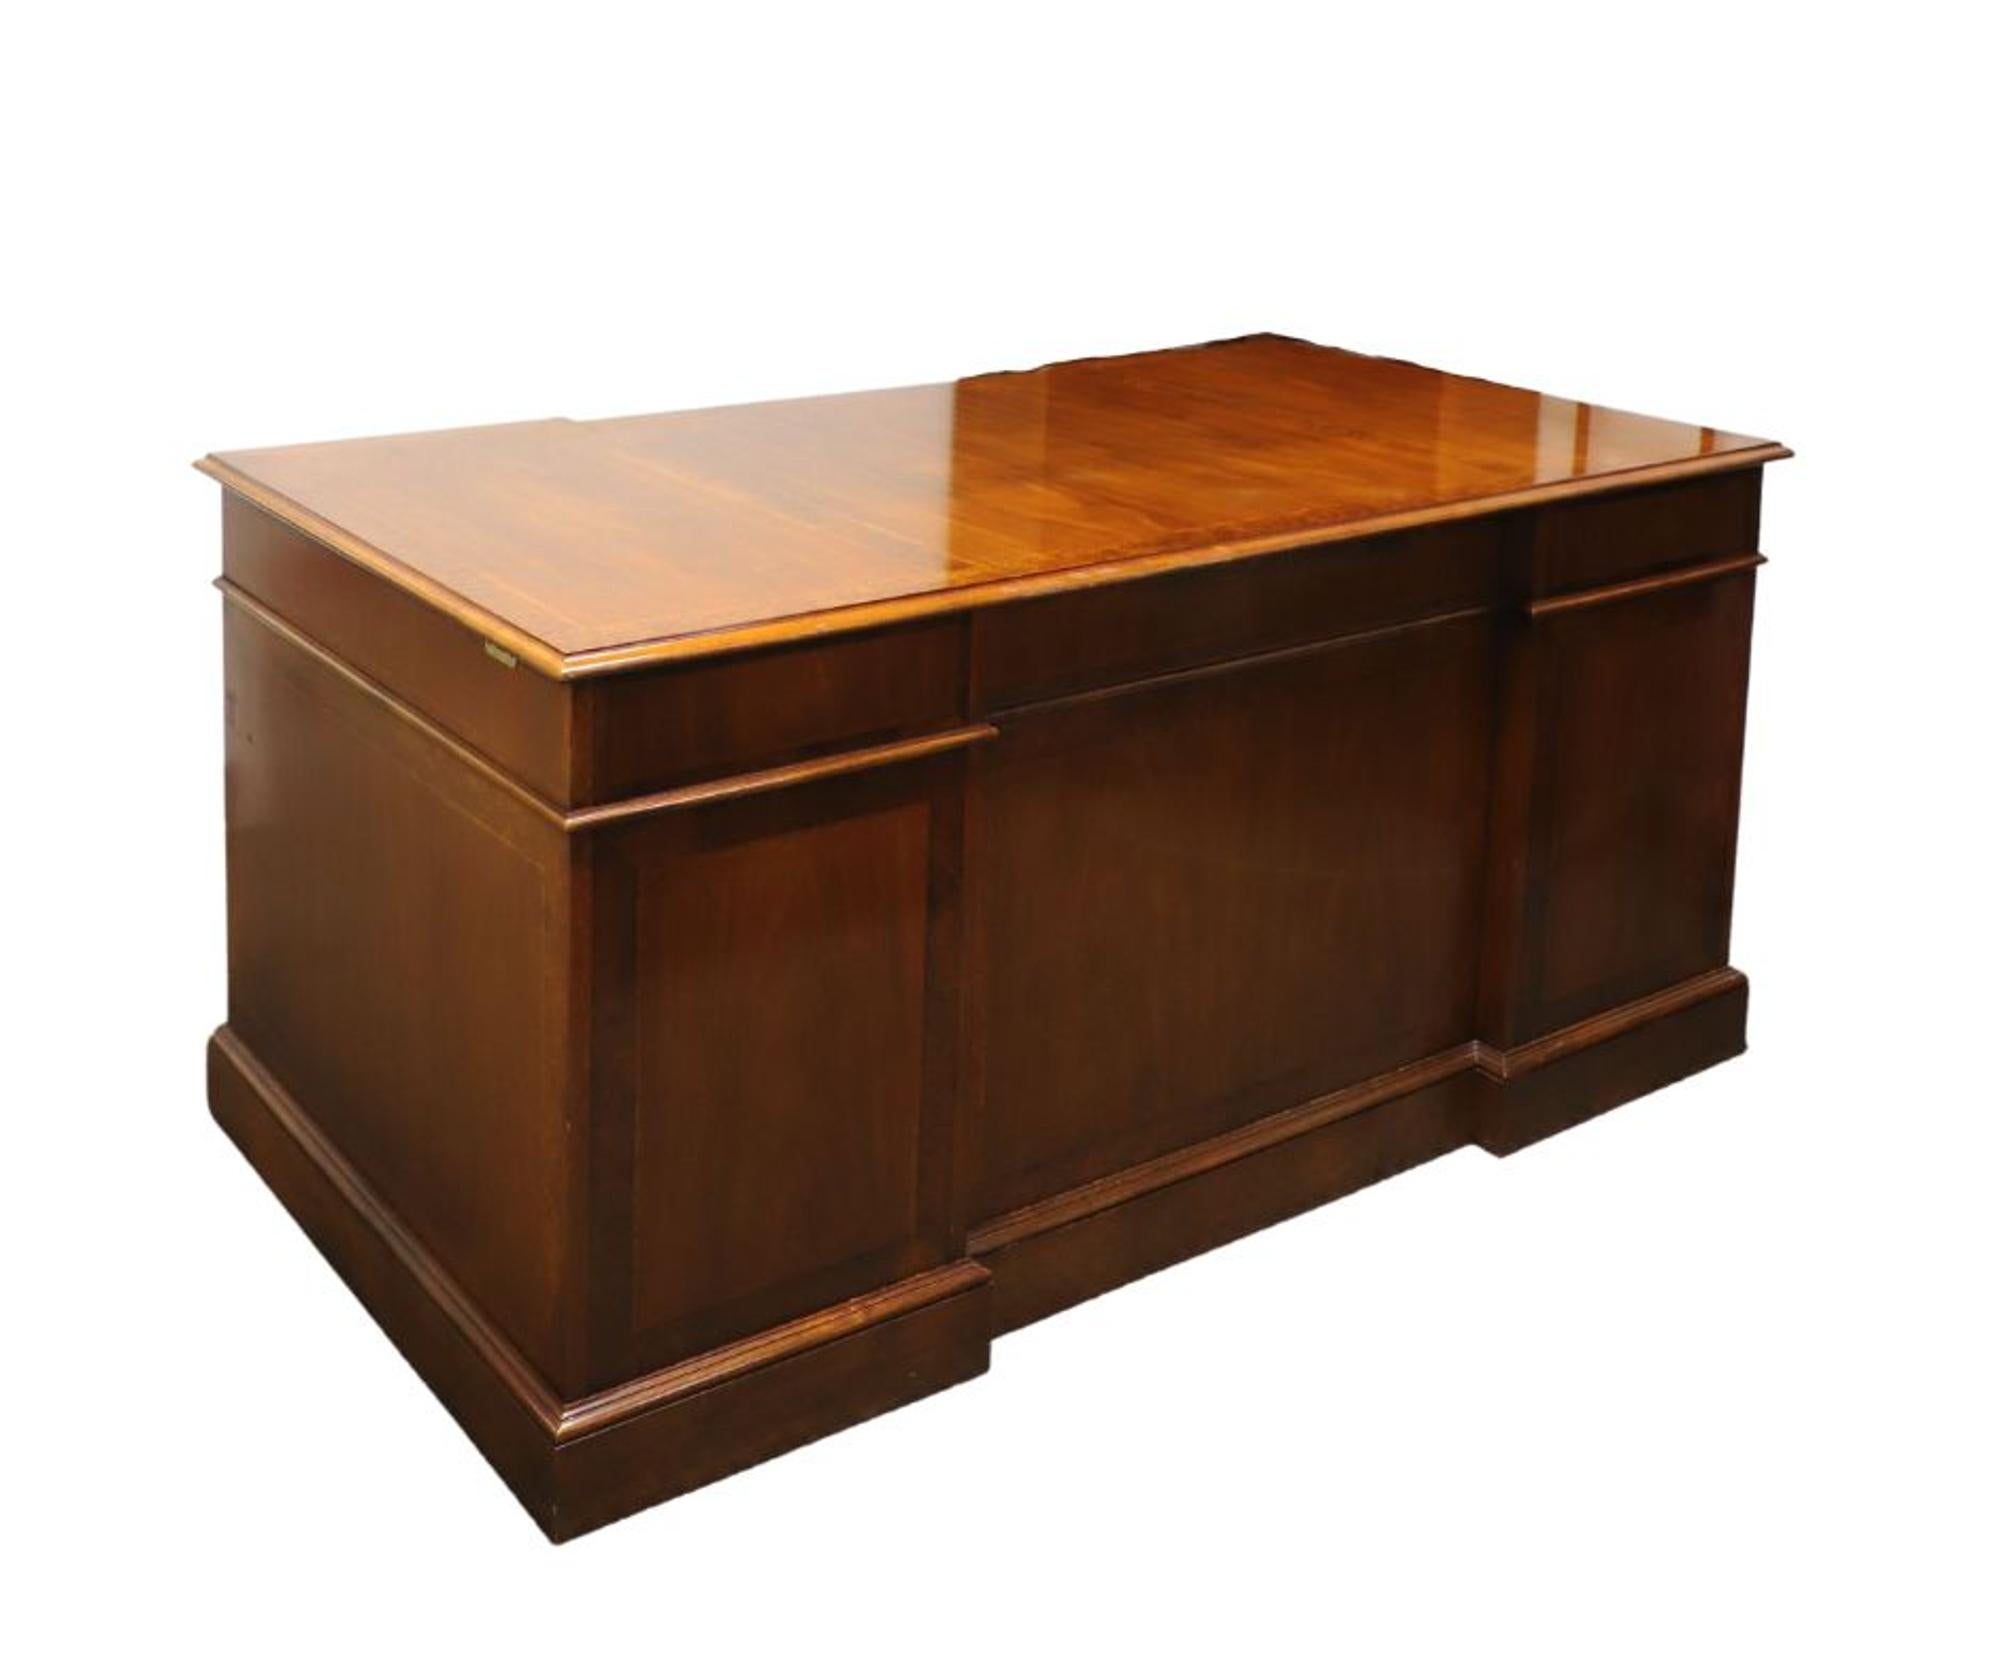 A Traditional style double pedestal executive desk by Councill Business Furniture. Walnut and burl walnut, banded top, brass hardware, banded drawer fronts & panels, and solid pedestal bases. The user side of the desk features seven drawers of